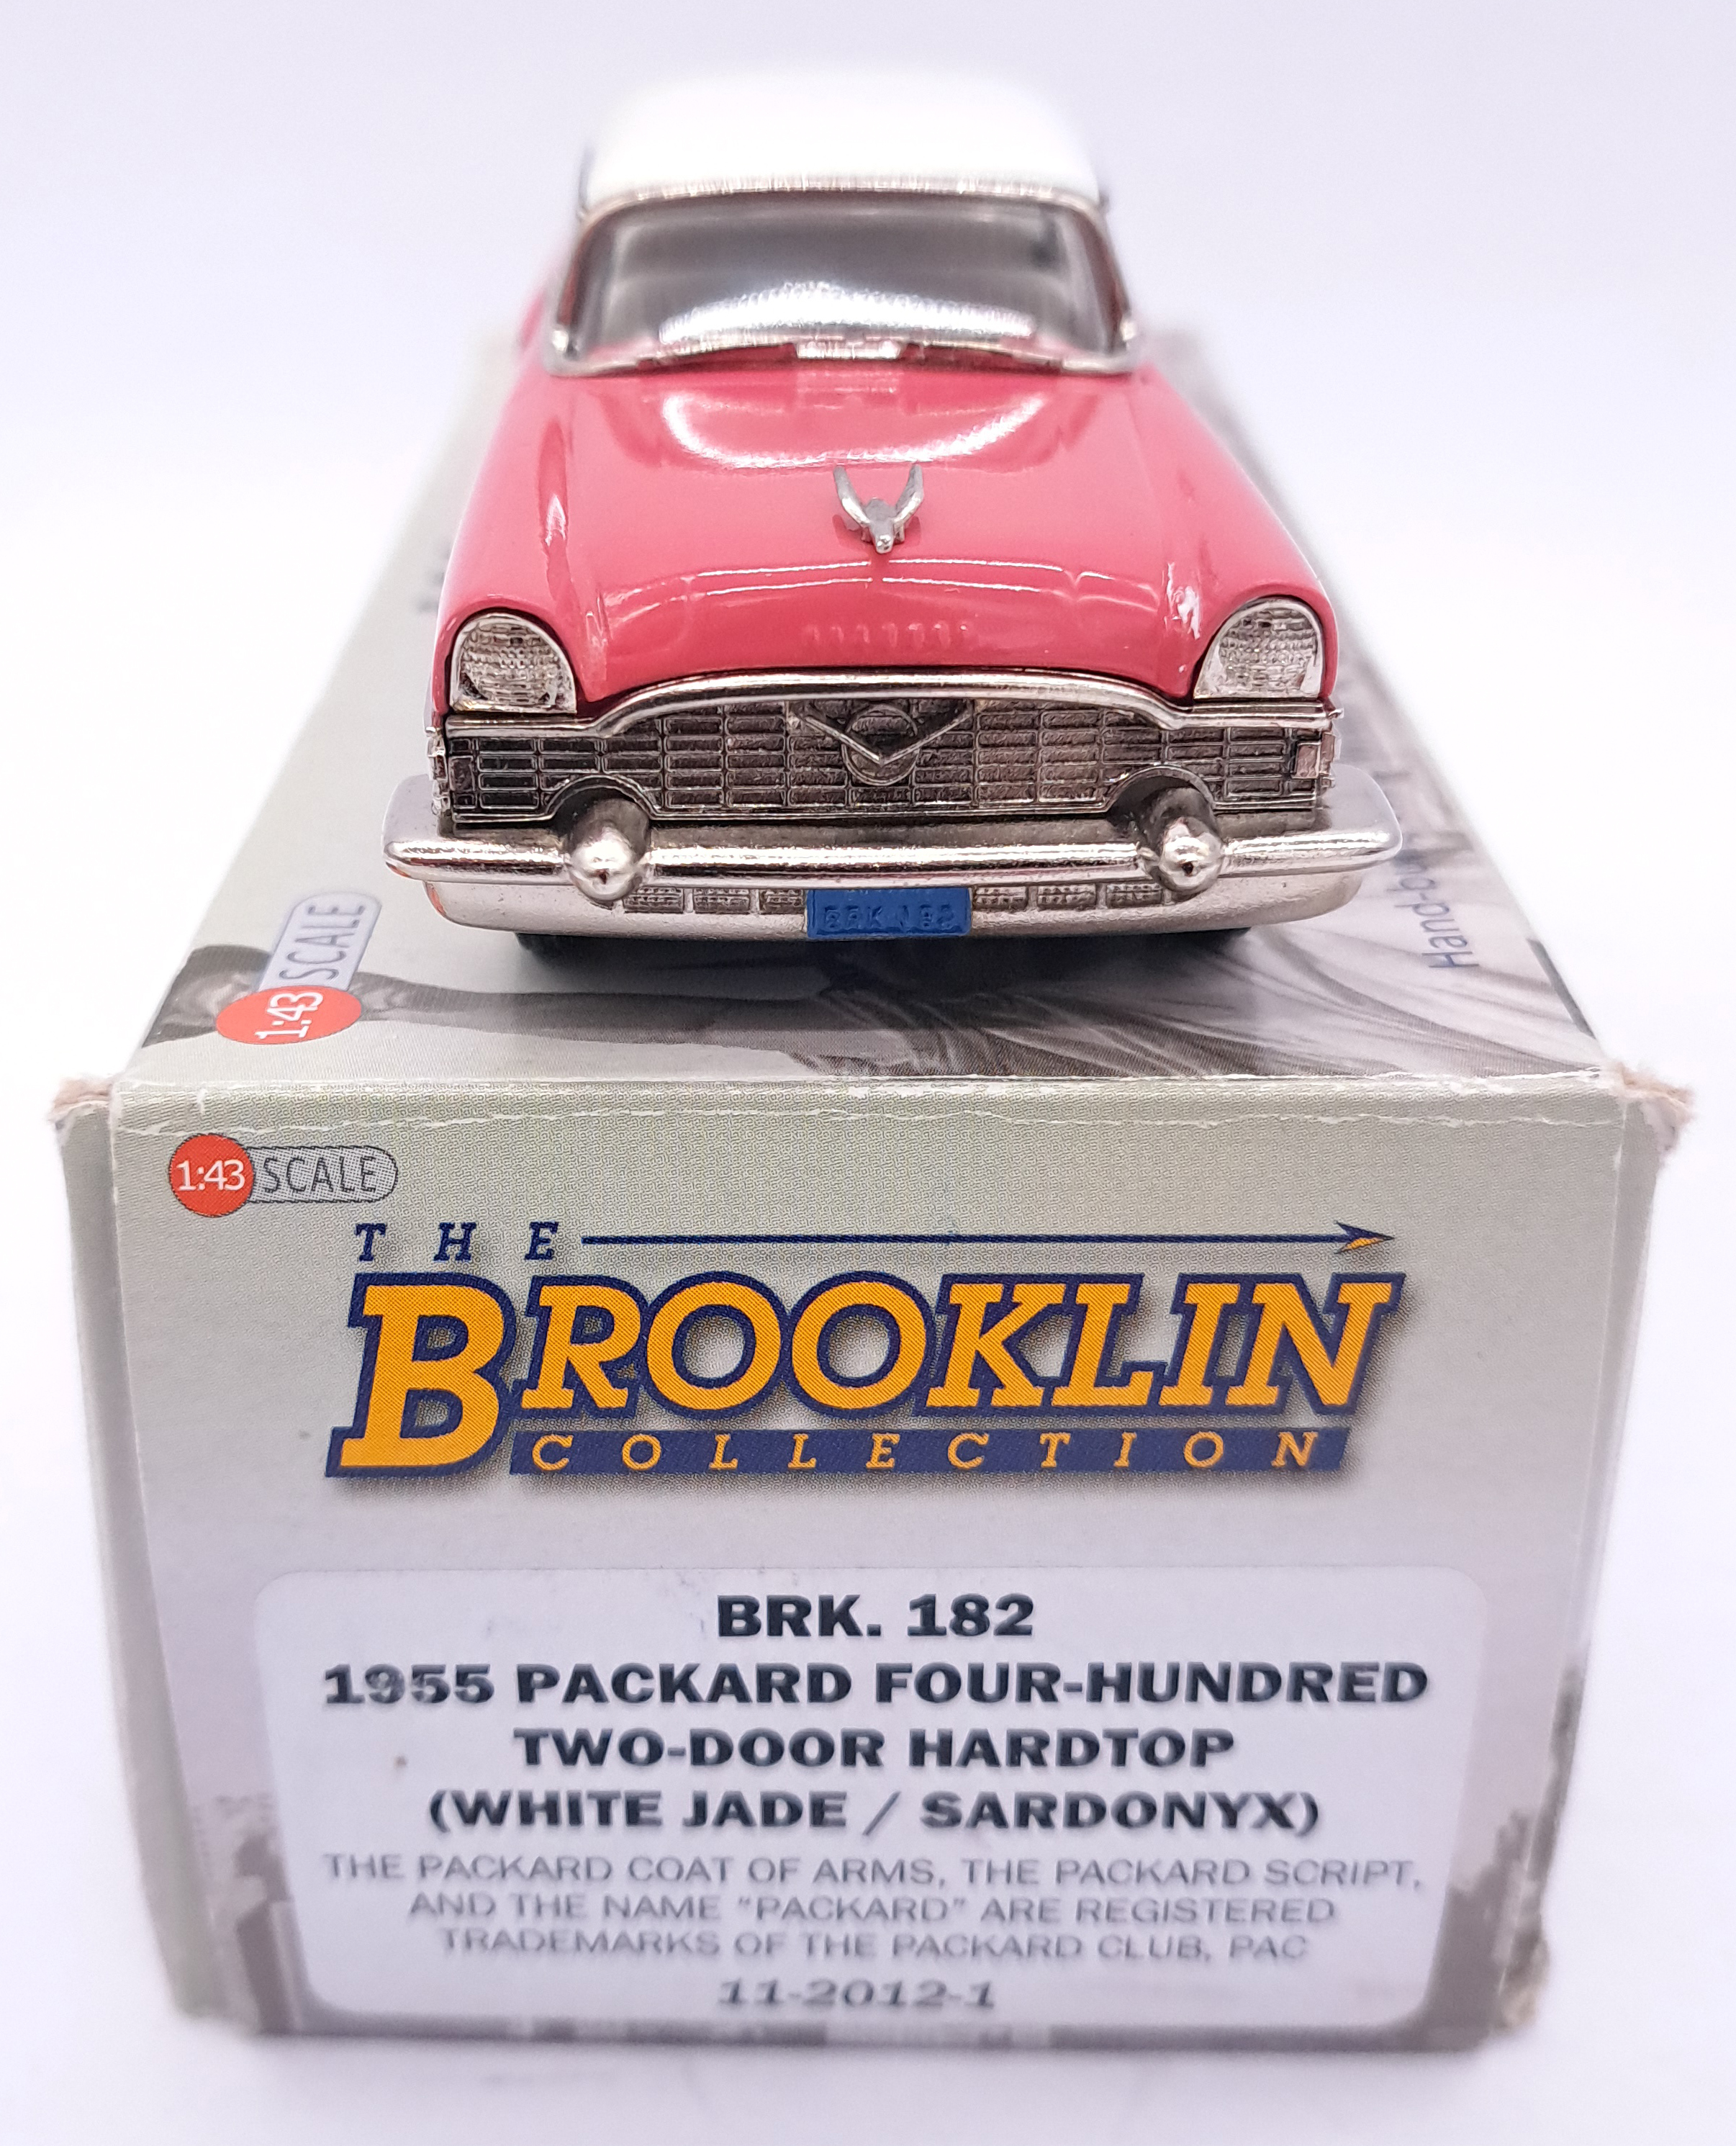 Brooklin Models a boxed 1:43 scale BRK.182 - Image 2 of 5